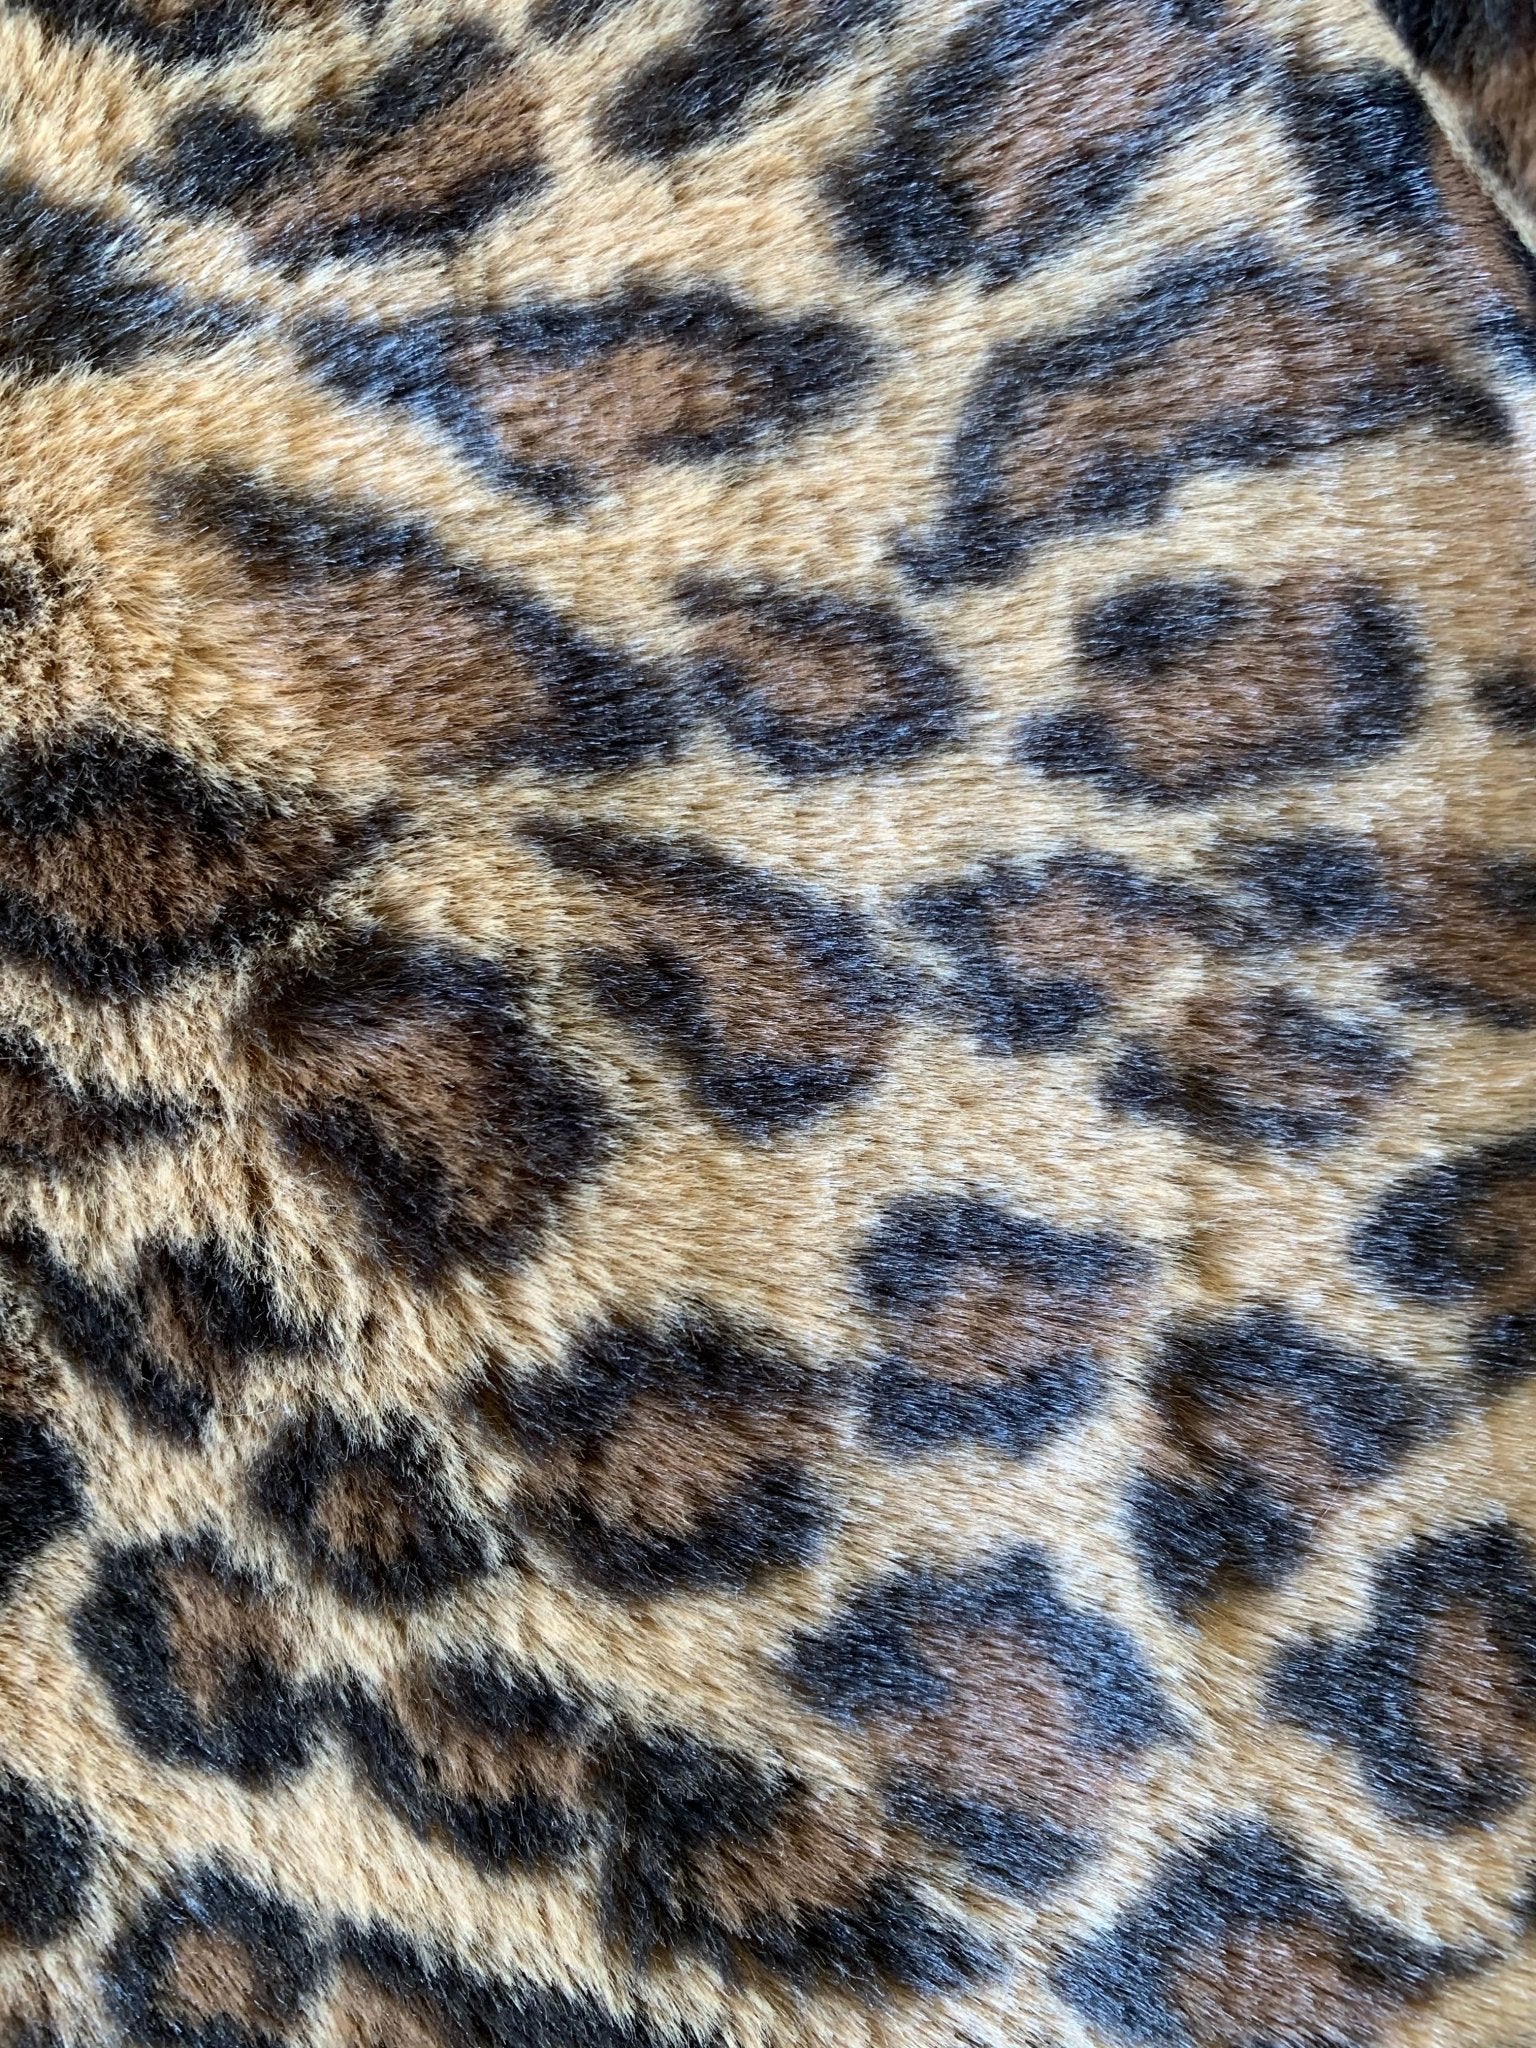 Leopard Fake Faux Fur Fabric By The Yard - Faux Fur Material Fashion FabricICEFABRICICE FABRICSCoffee BrownBy The Yard (60 inches Wide)Leopard Fake Faux Fur Fabric By The Yard - Faux Fur Material Fashion Fabric ICEFABRIC Pink